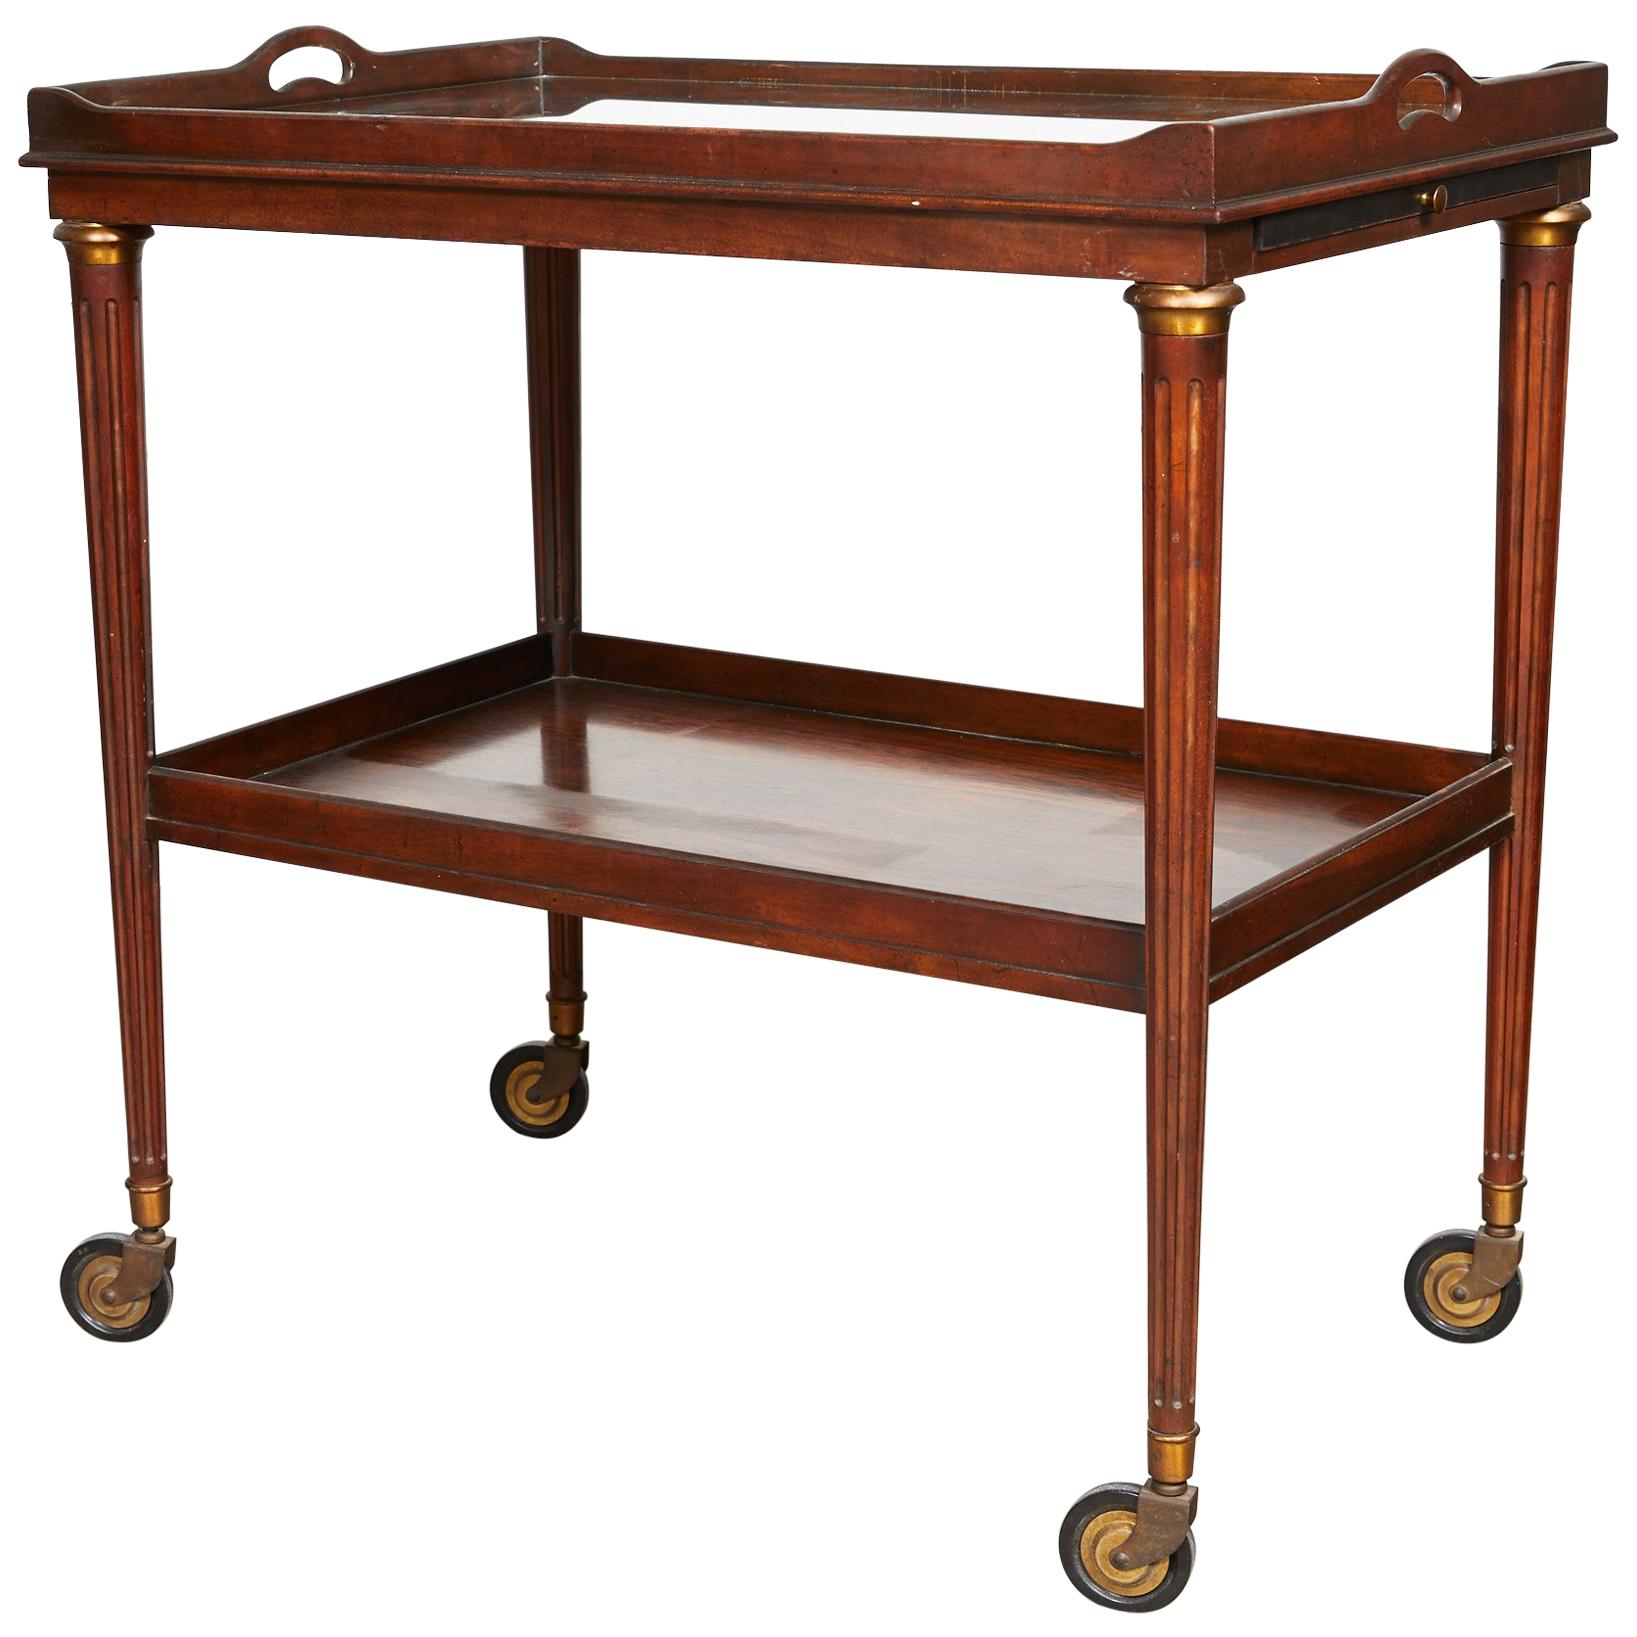 20th Century Two-Tier Bar Cart of Rosewood with Mirrored Top